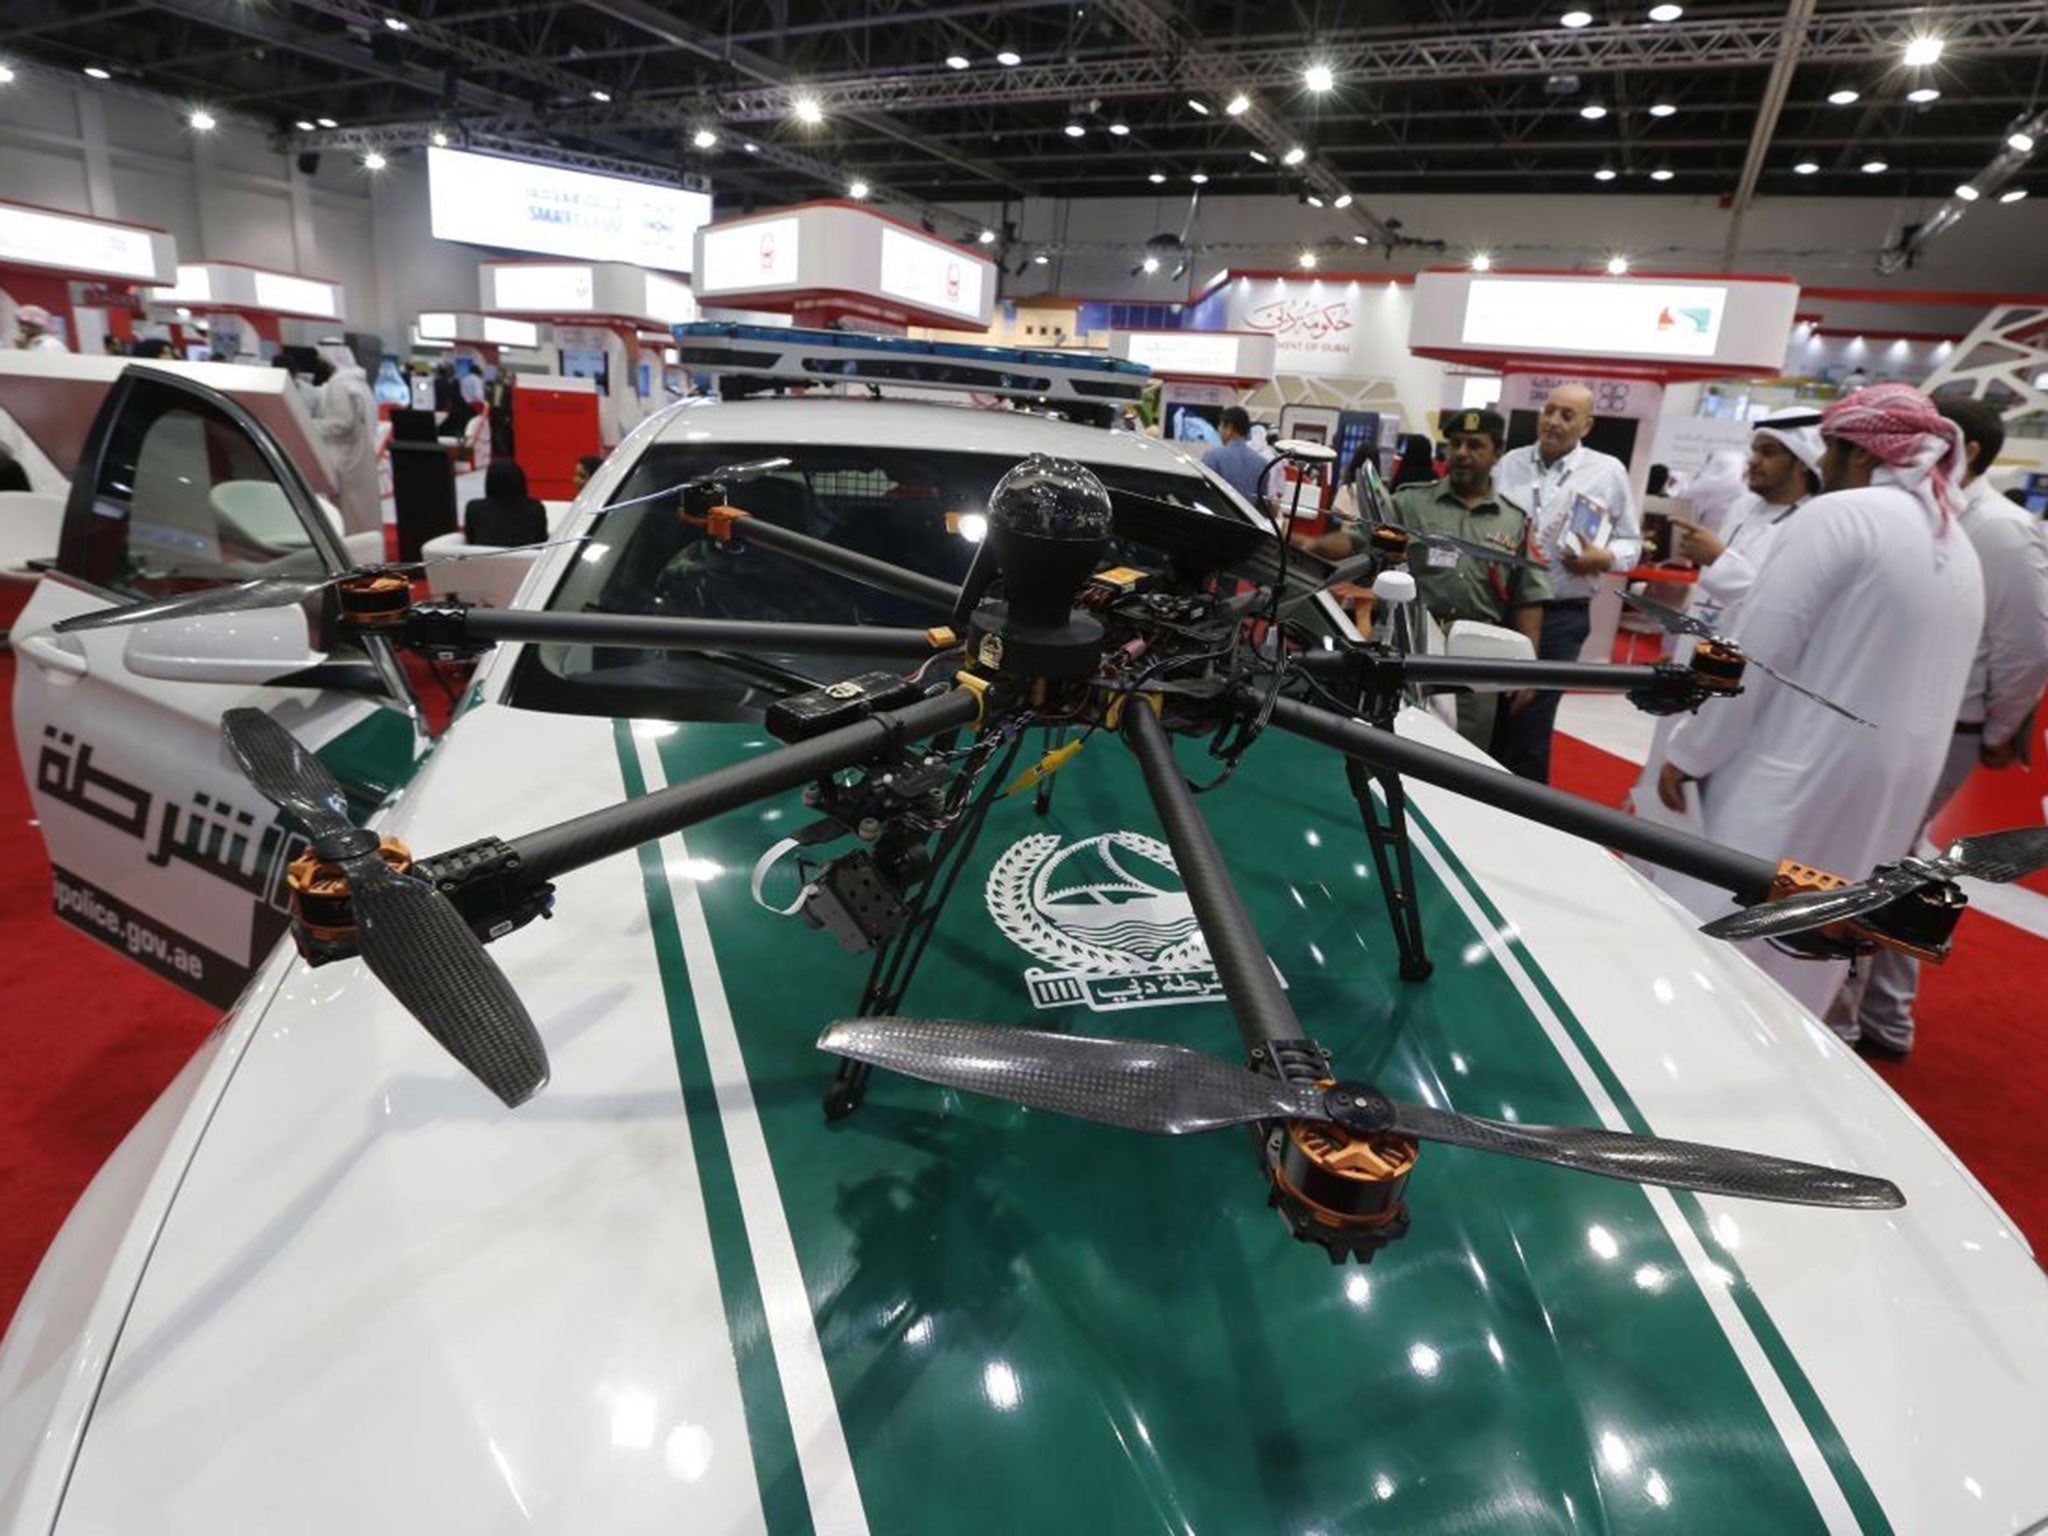 Visitors look at a drone equipped with cameras on a police car at the Gitex Technology week in Dubai